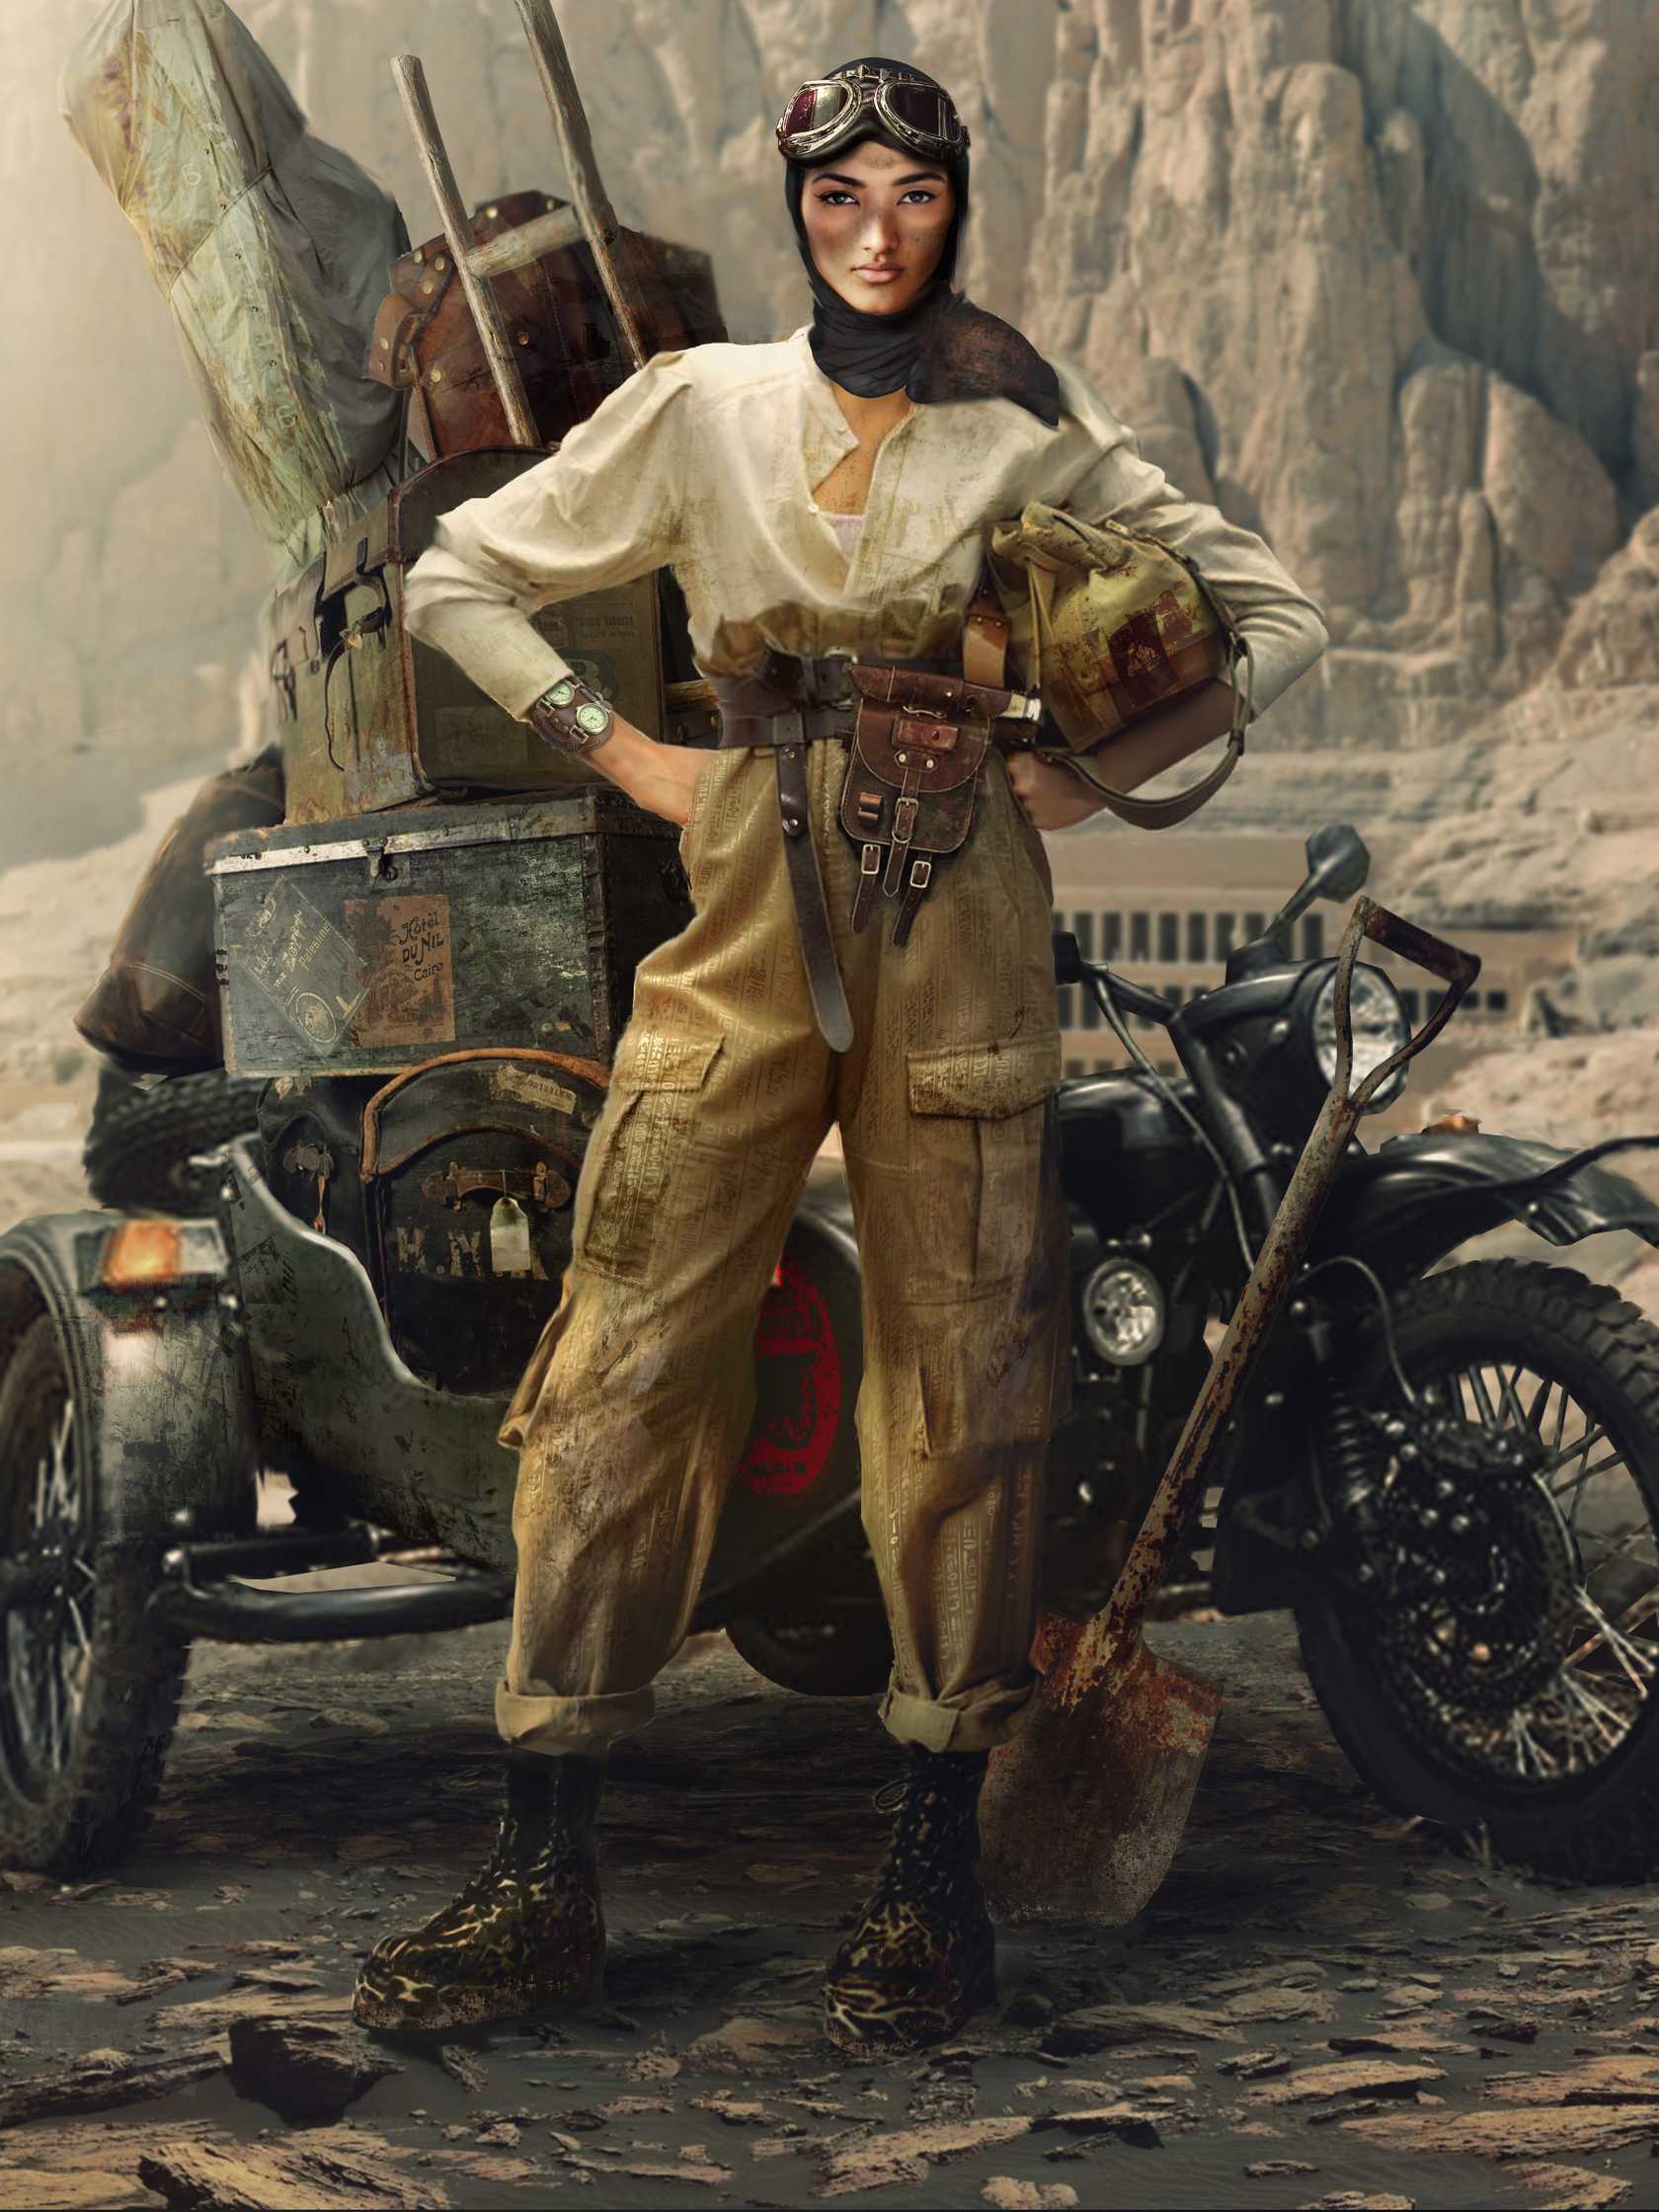 A confident woman posing in front of her cargo-laden motorcycle rig. She looks like some kind of archeologist.